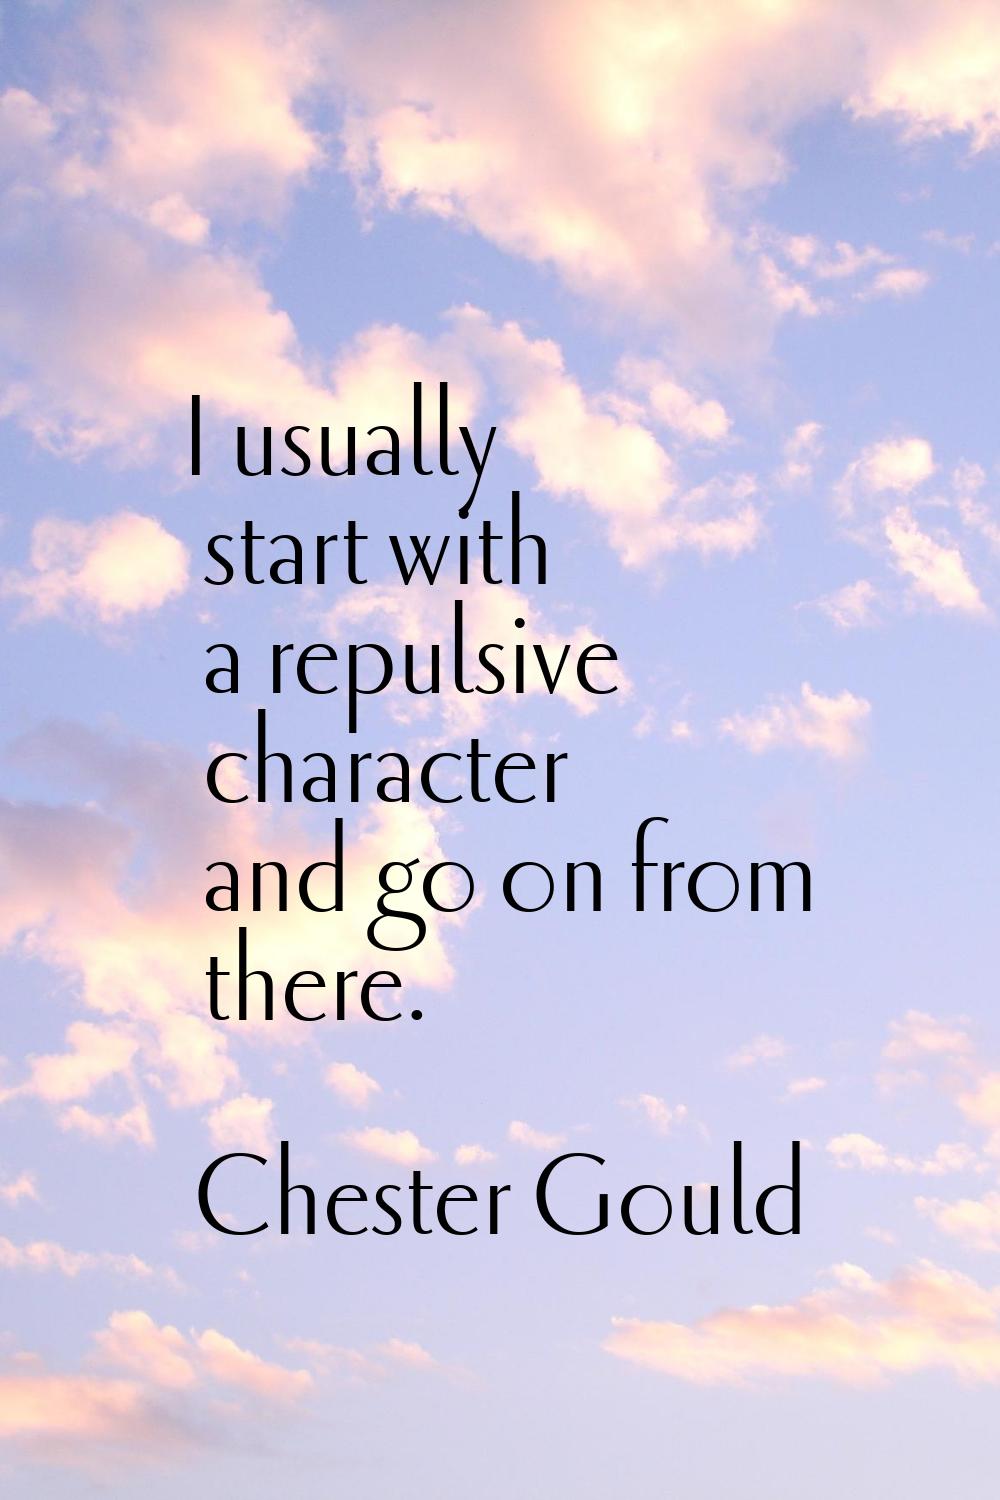 I usually start with a repulsive character and go on from there.